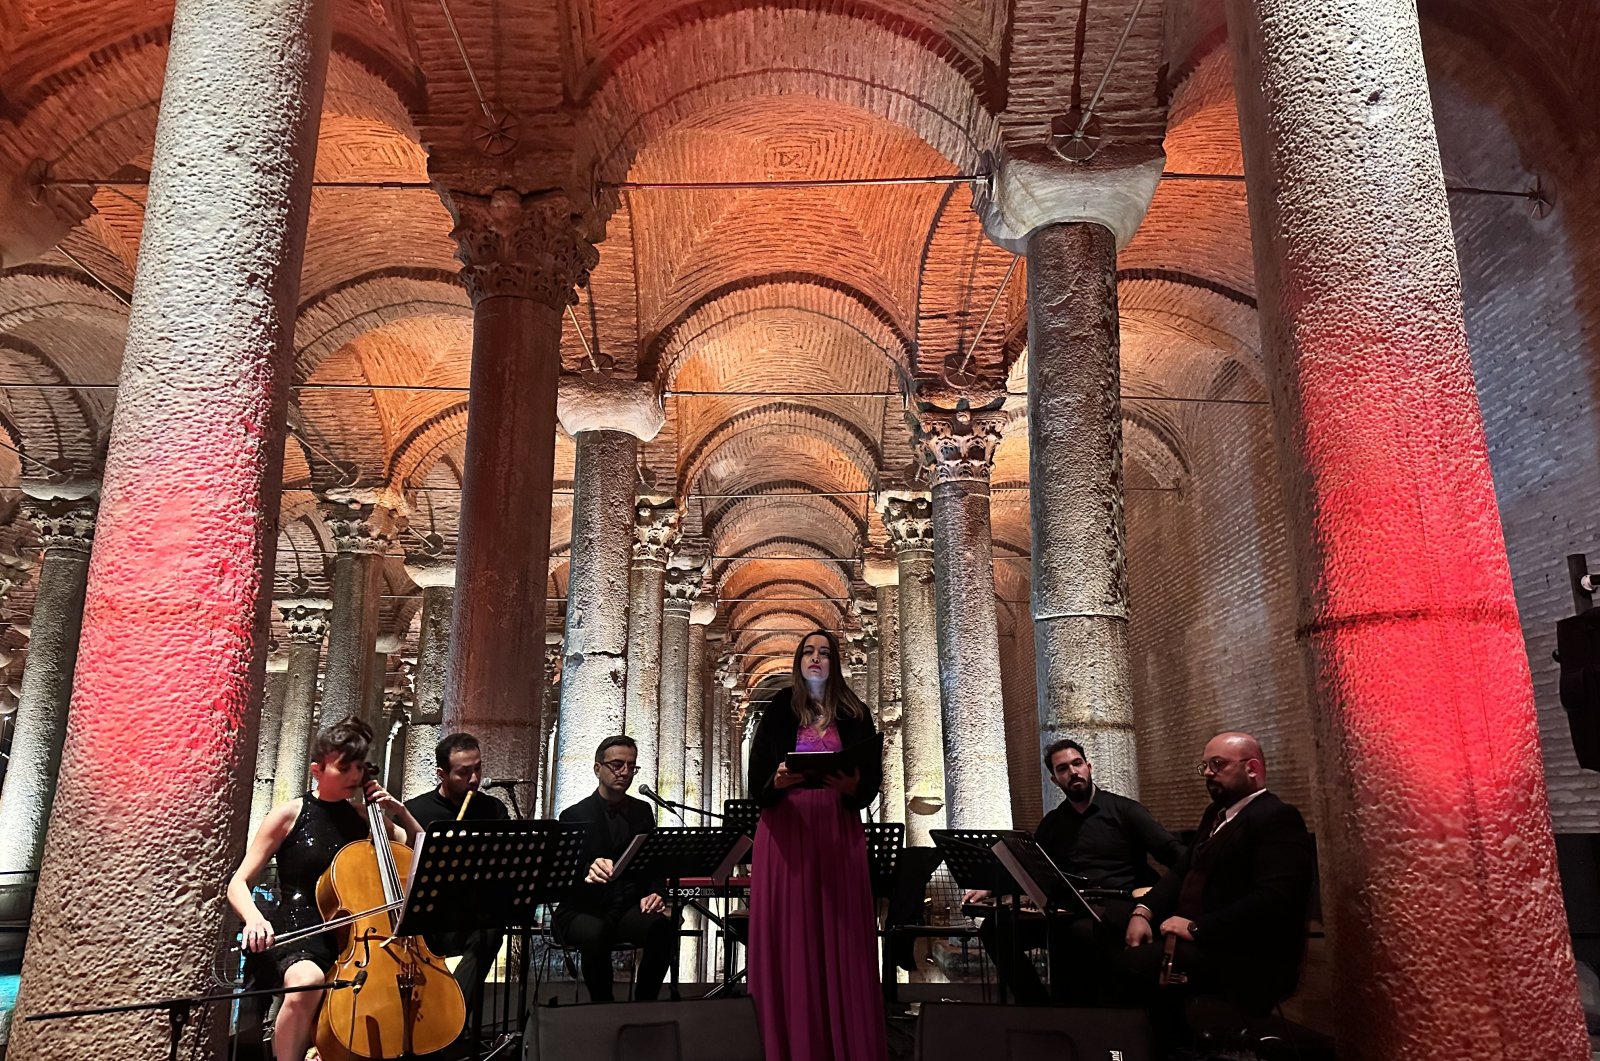 The performance of &quot;From Bach to Itri&quot; by Ensemble Orient - Occident Istanbul, Türkiye, Jan. 25, 2023. (Photo by Derya Taşbaşı)